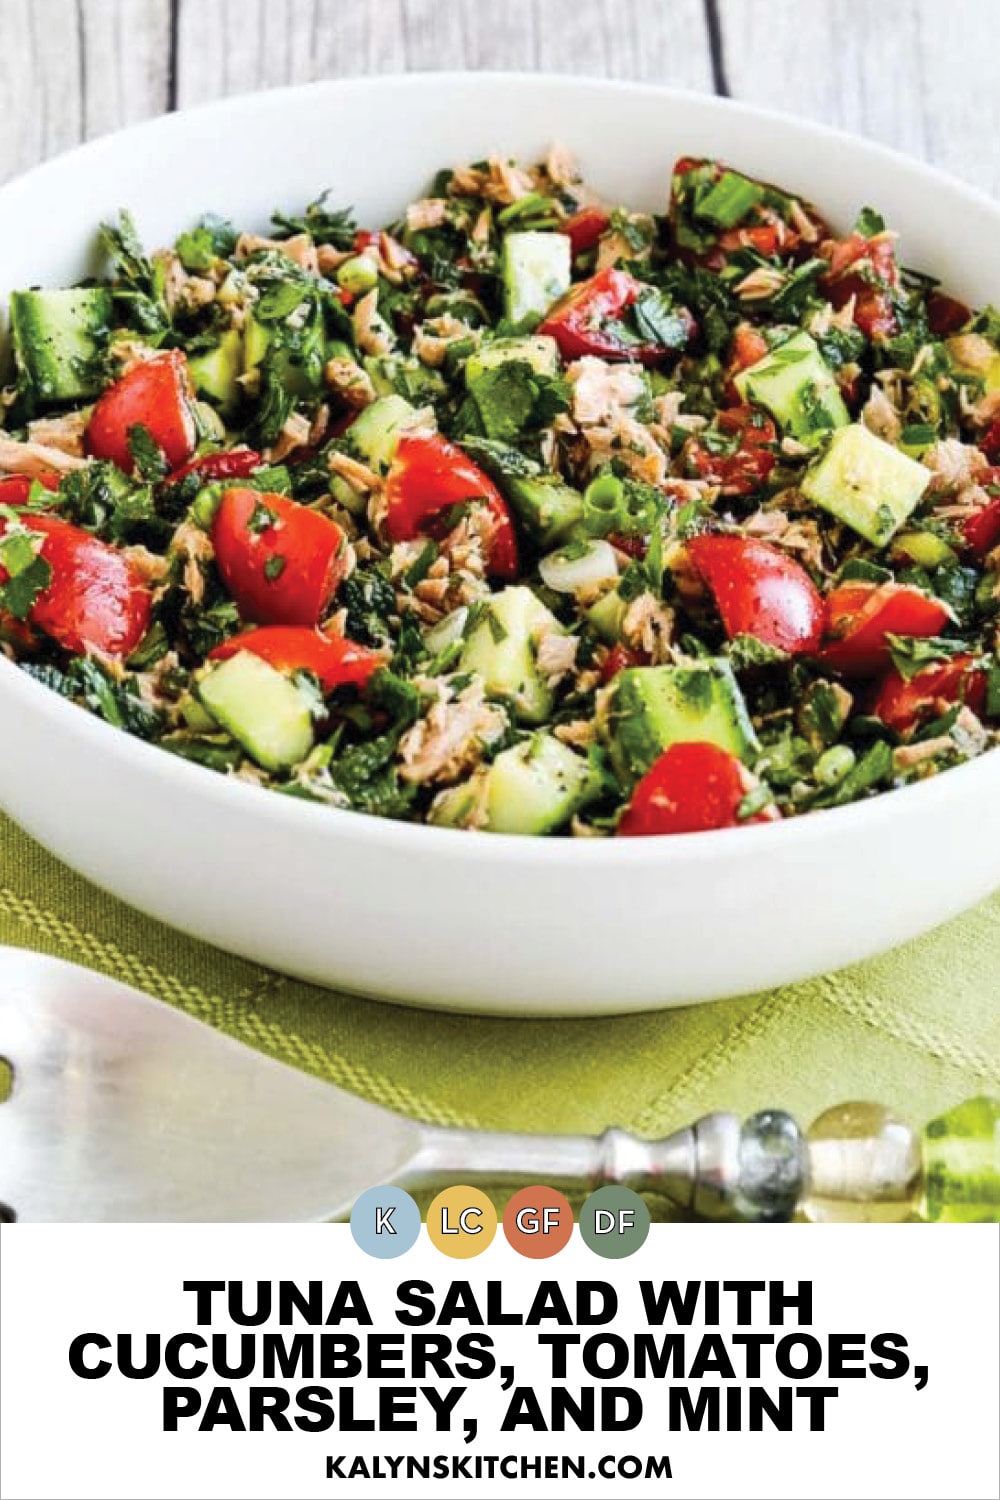 Pinterest image of Tuna Salad with Cucumbers, Tomatoes, Parsley, and Mint